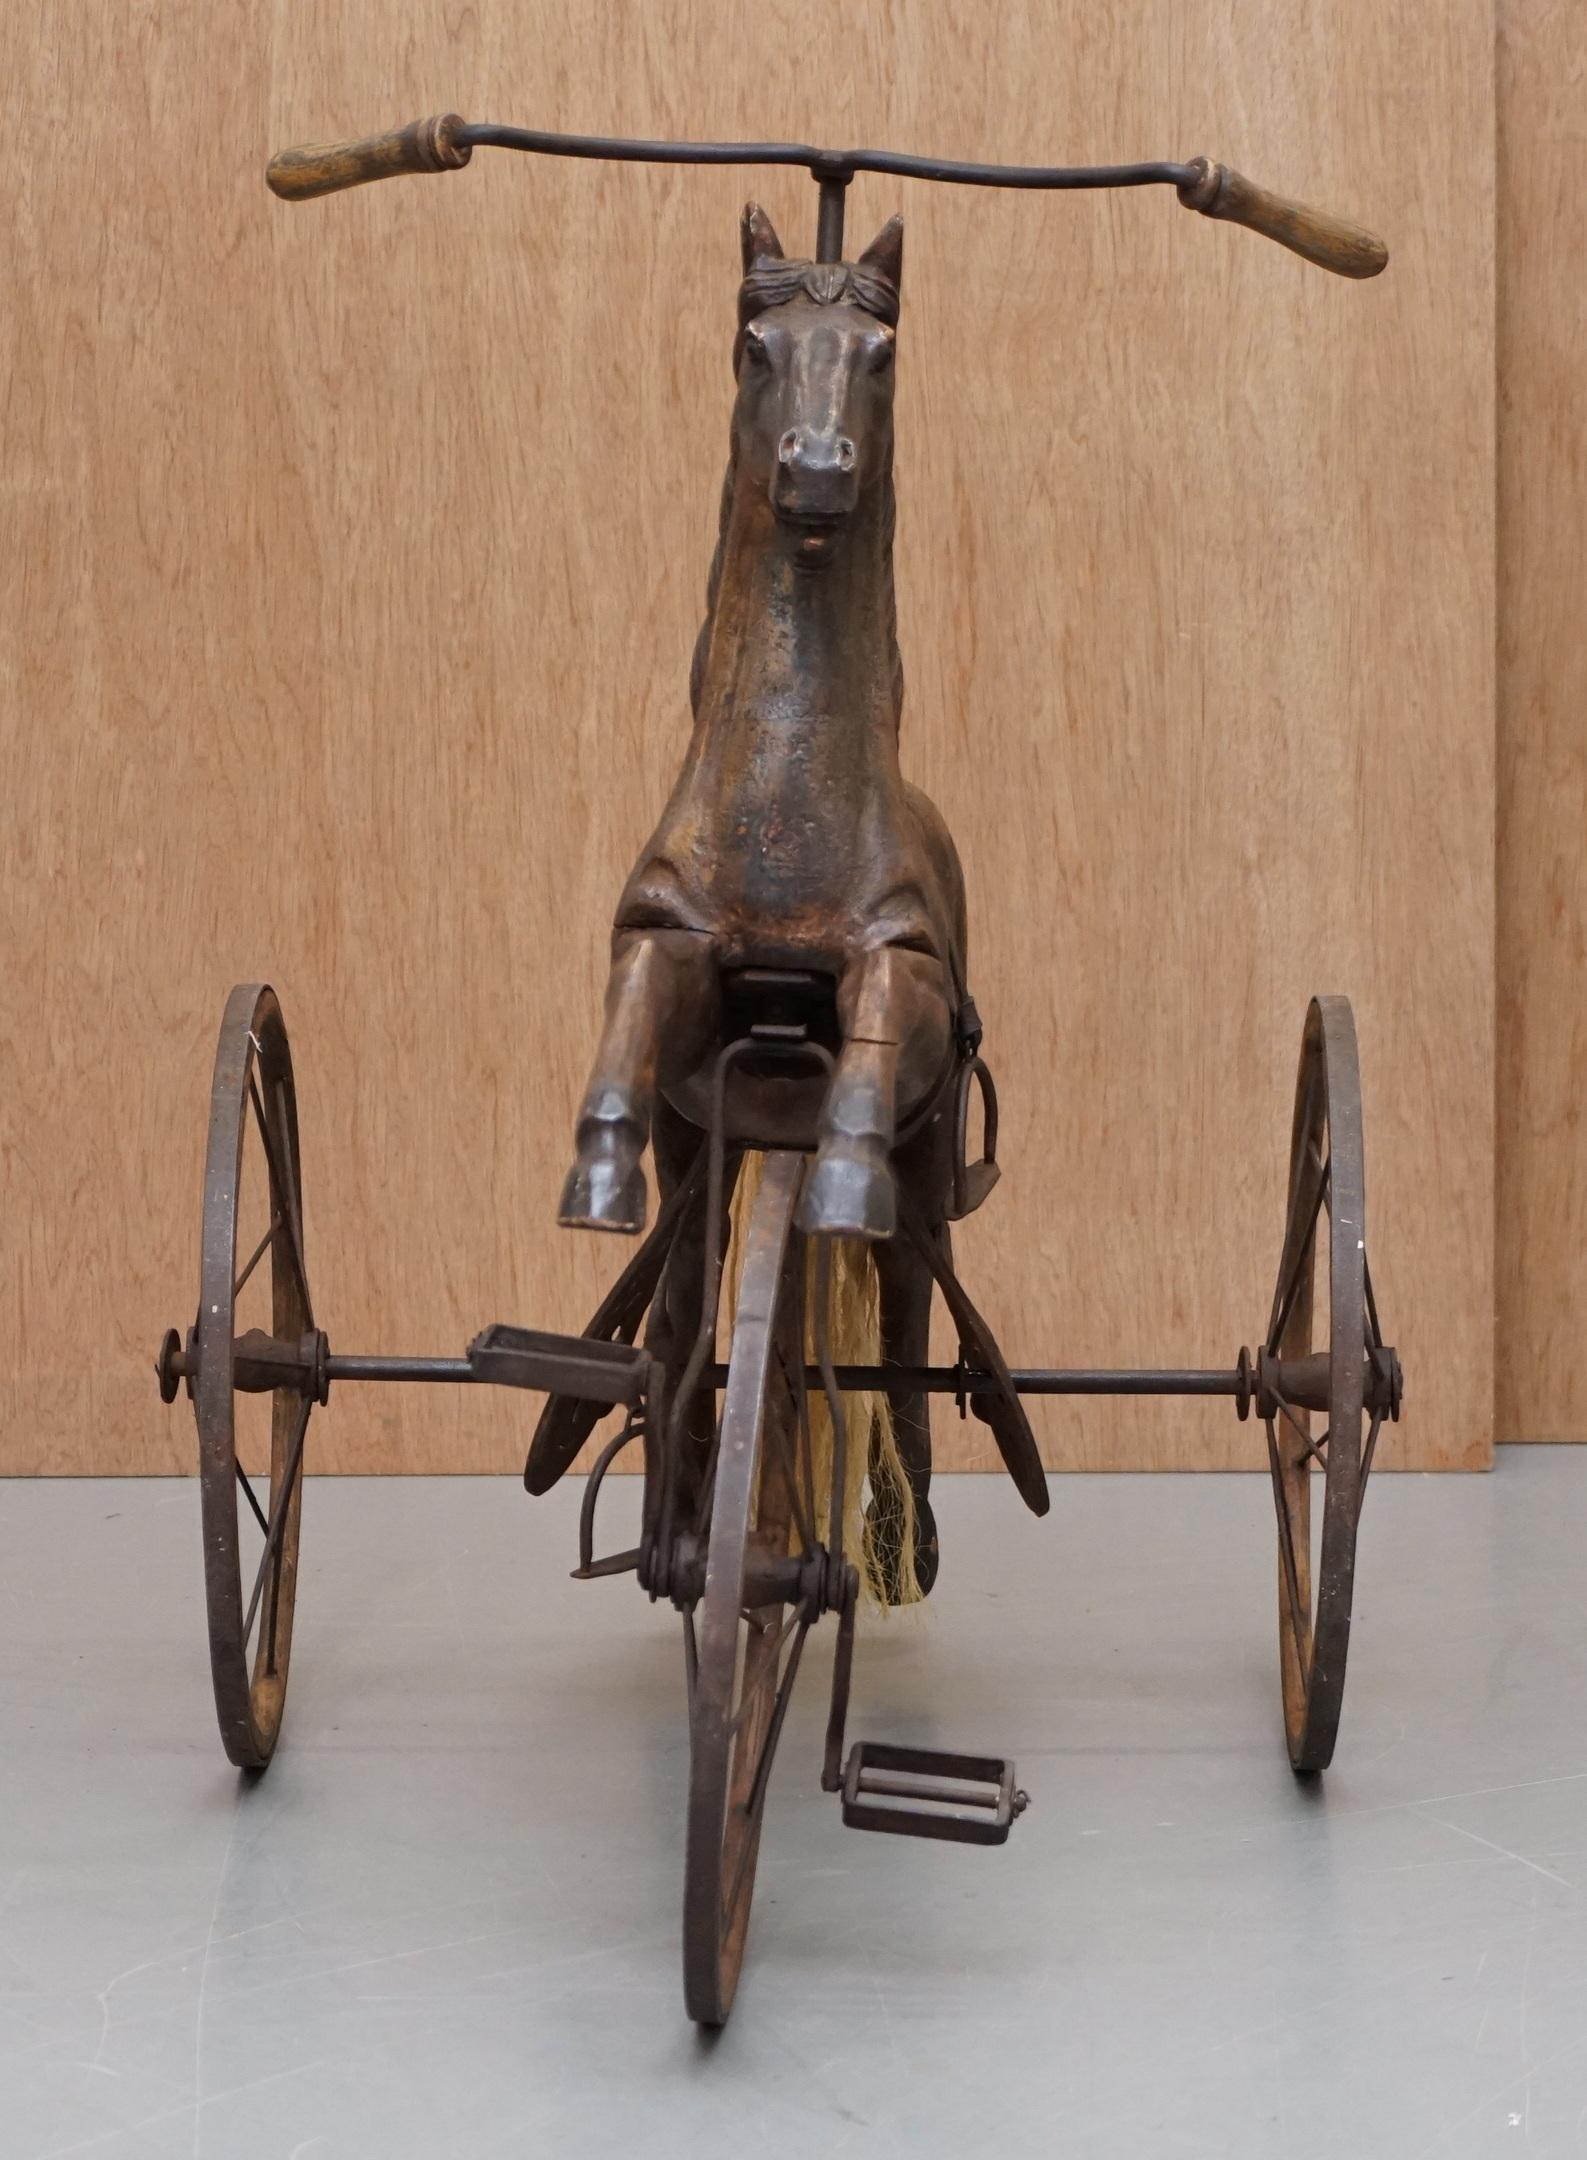 We are delighted to this lovely original Victorian children’s horse tricycle

A very well made, decorative and functional piece of Folk Art. This tricycle is the most original example I’ve come across with period stirrups, pedals, saddle and